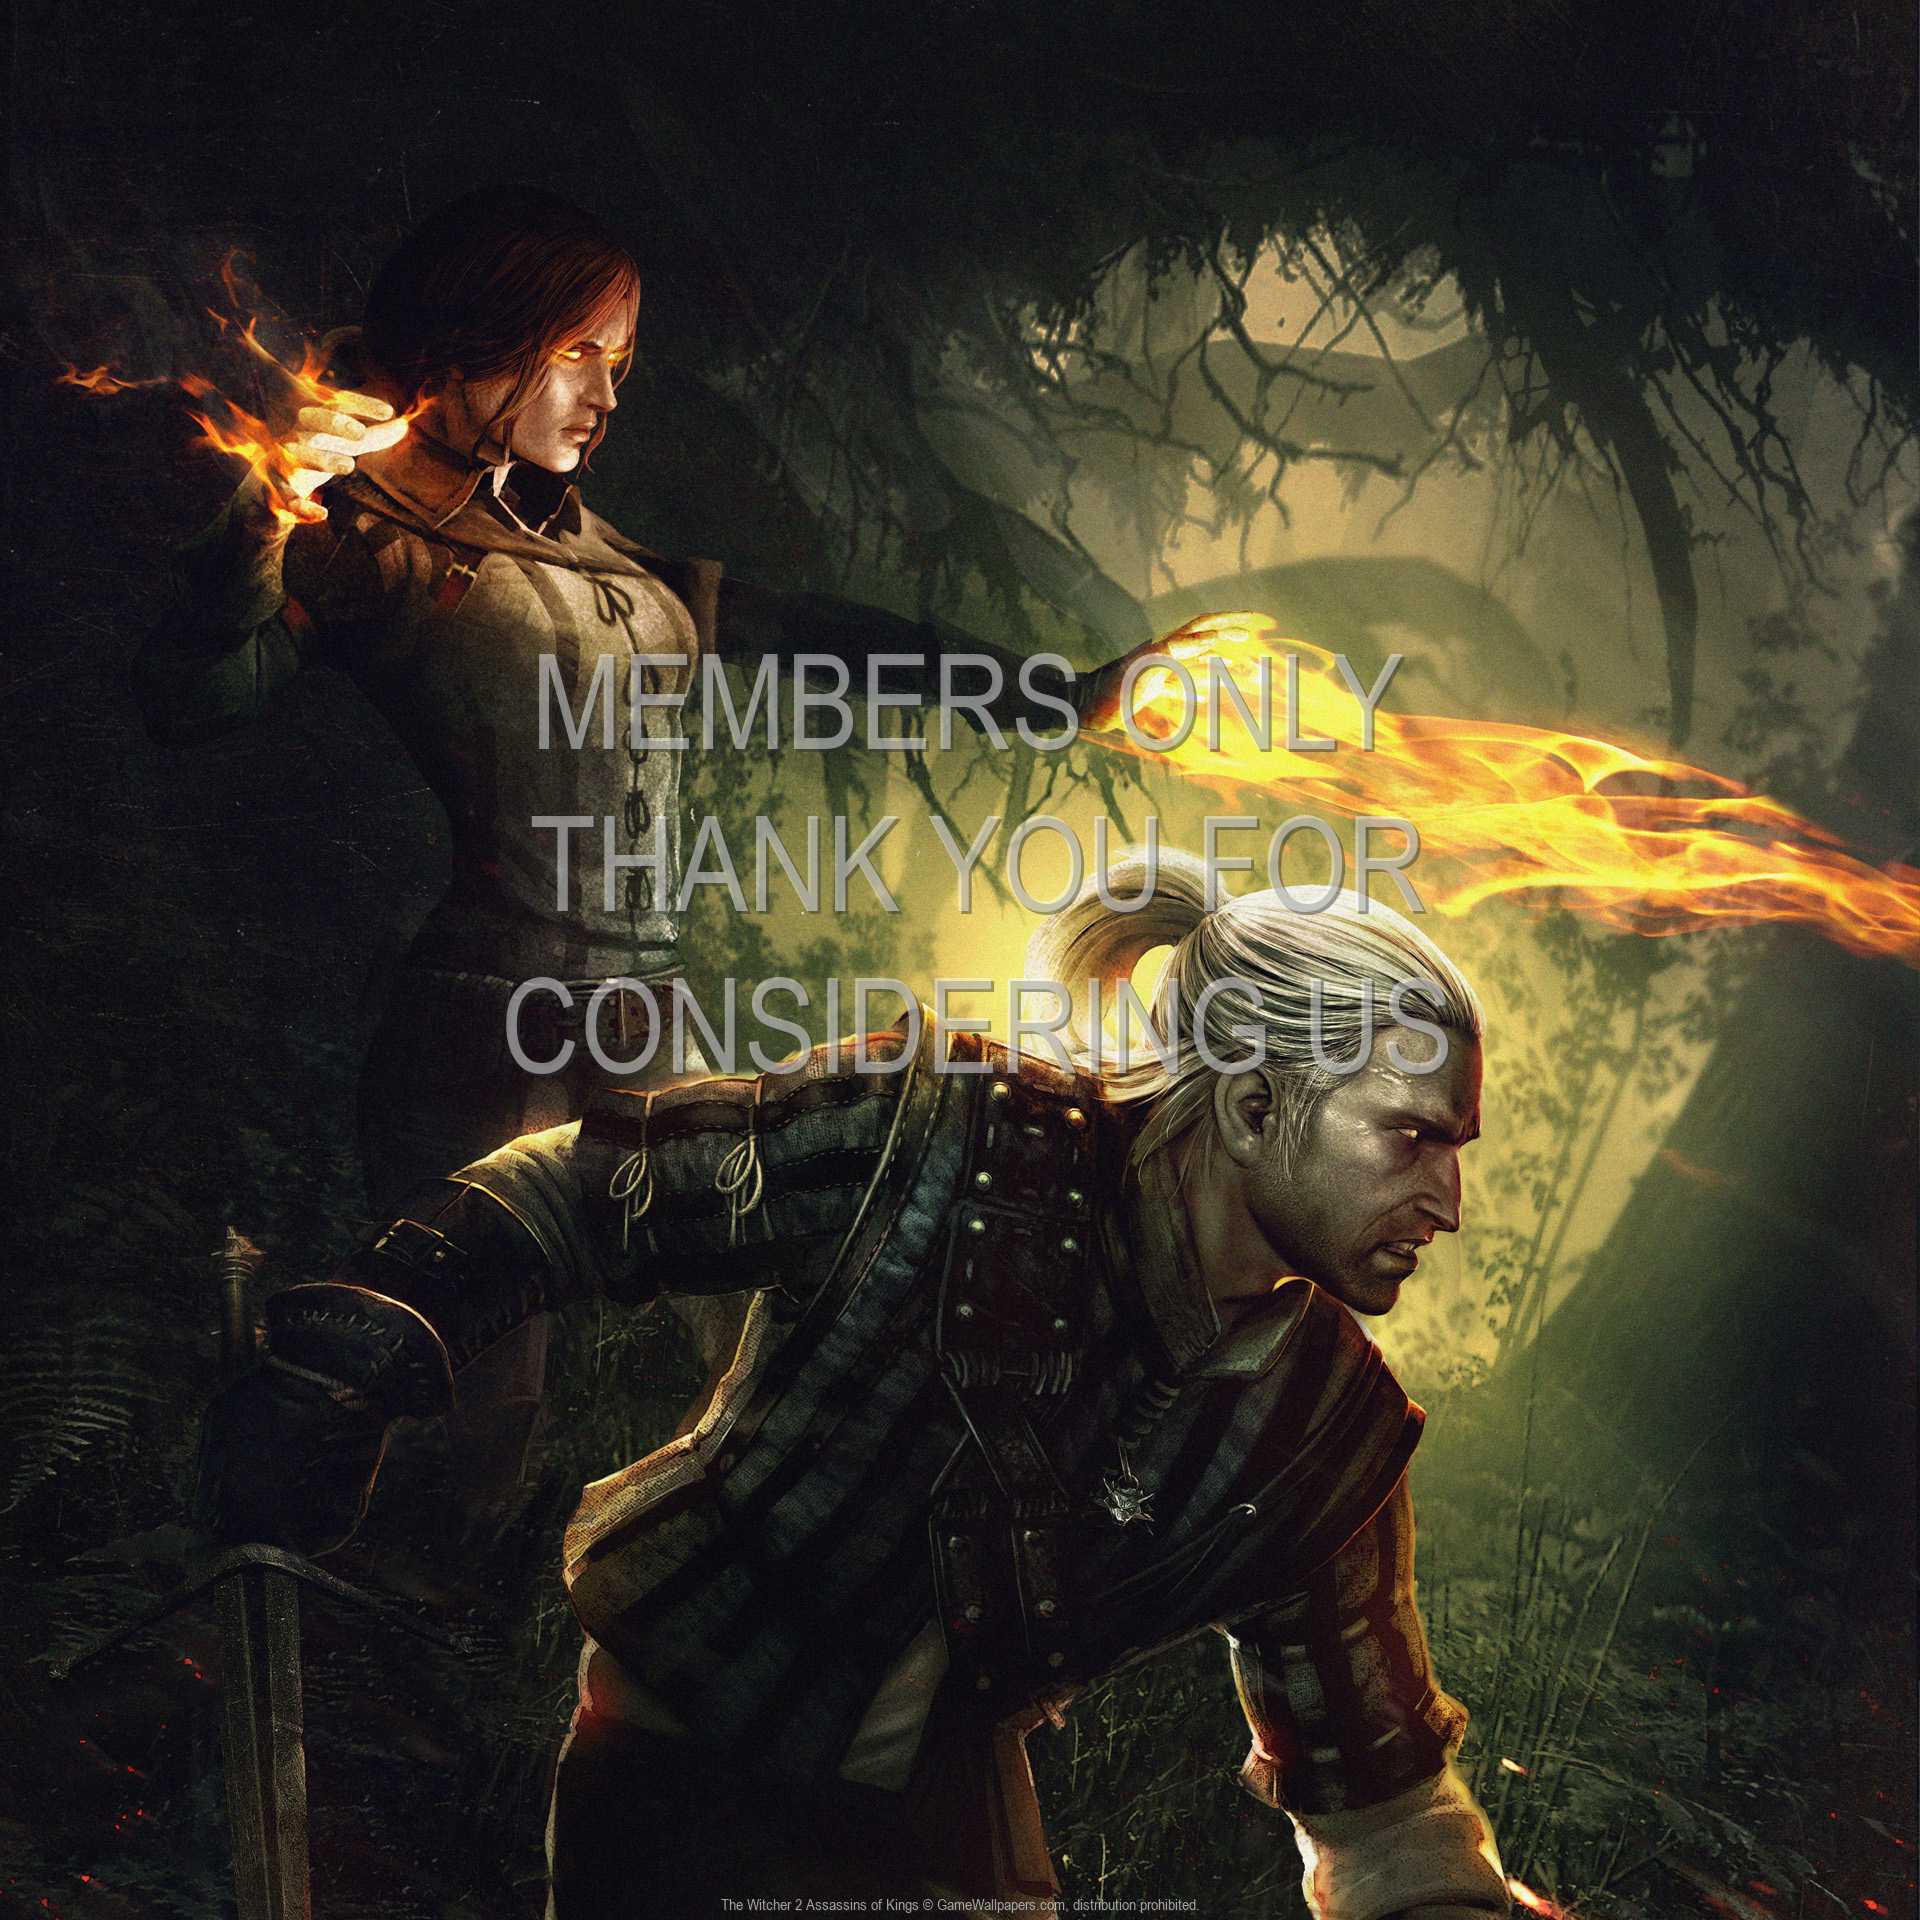 The Witcher 2: Assassins of Kings 1080p Horizontal Mobile wallpaper or background 08